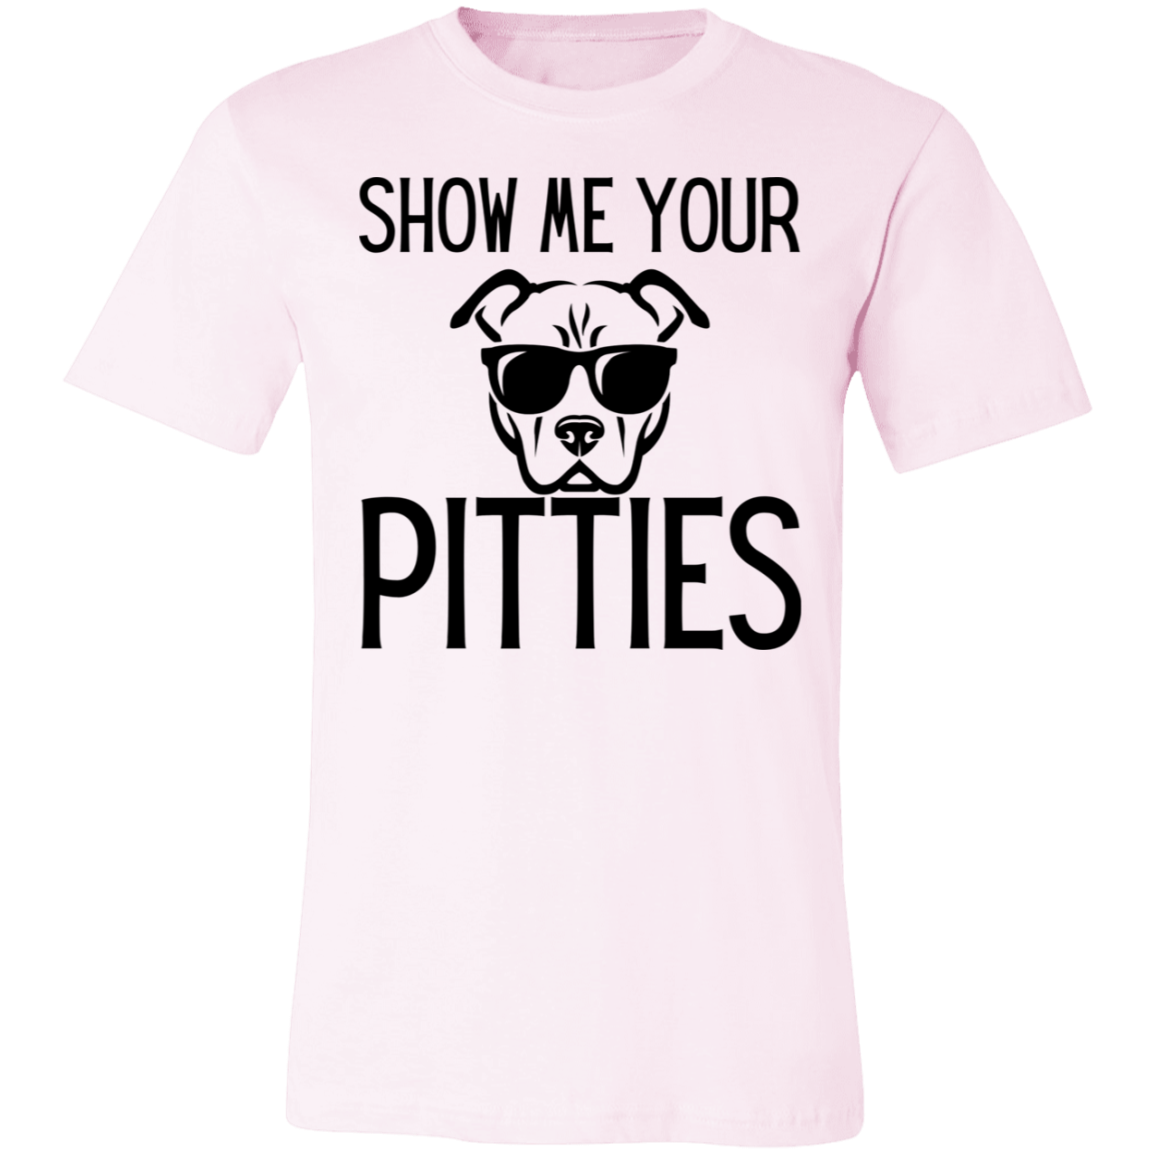 Show me your Pitties T-Shirt